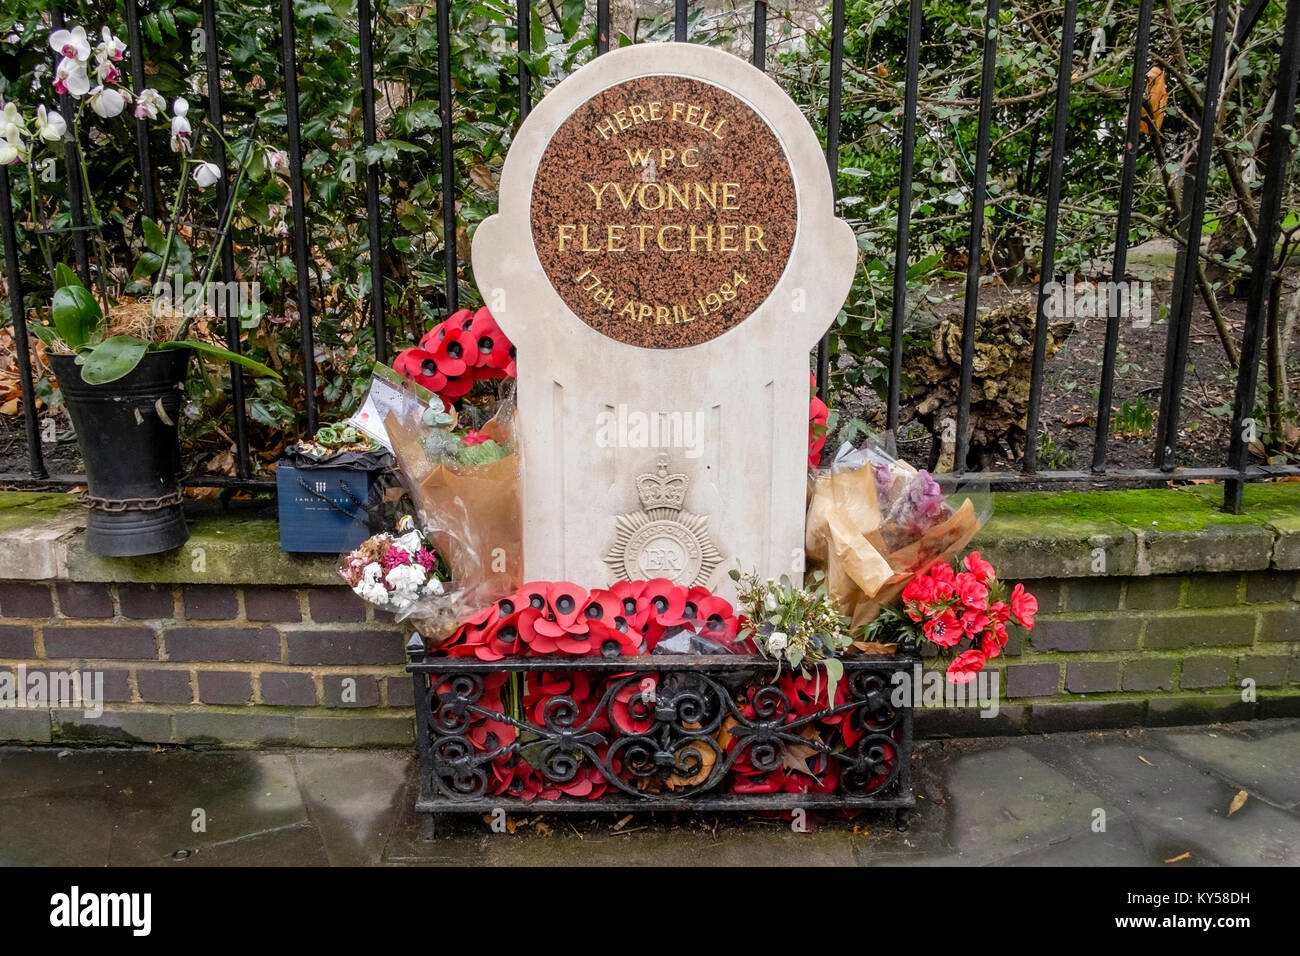 Memorial to WPC Yvonne Fletcher who was shot whilst policing a demonstration outside the Libyan Embassy in London in 1984. St. James's Square, London, Stock Photo